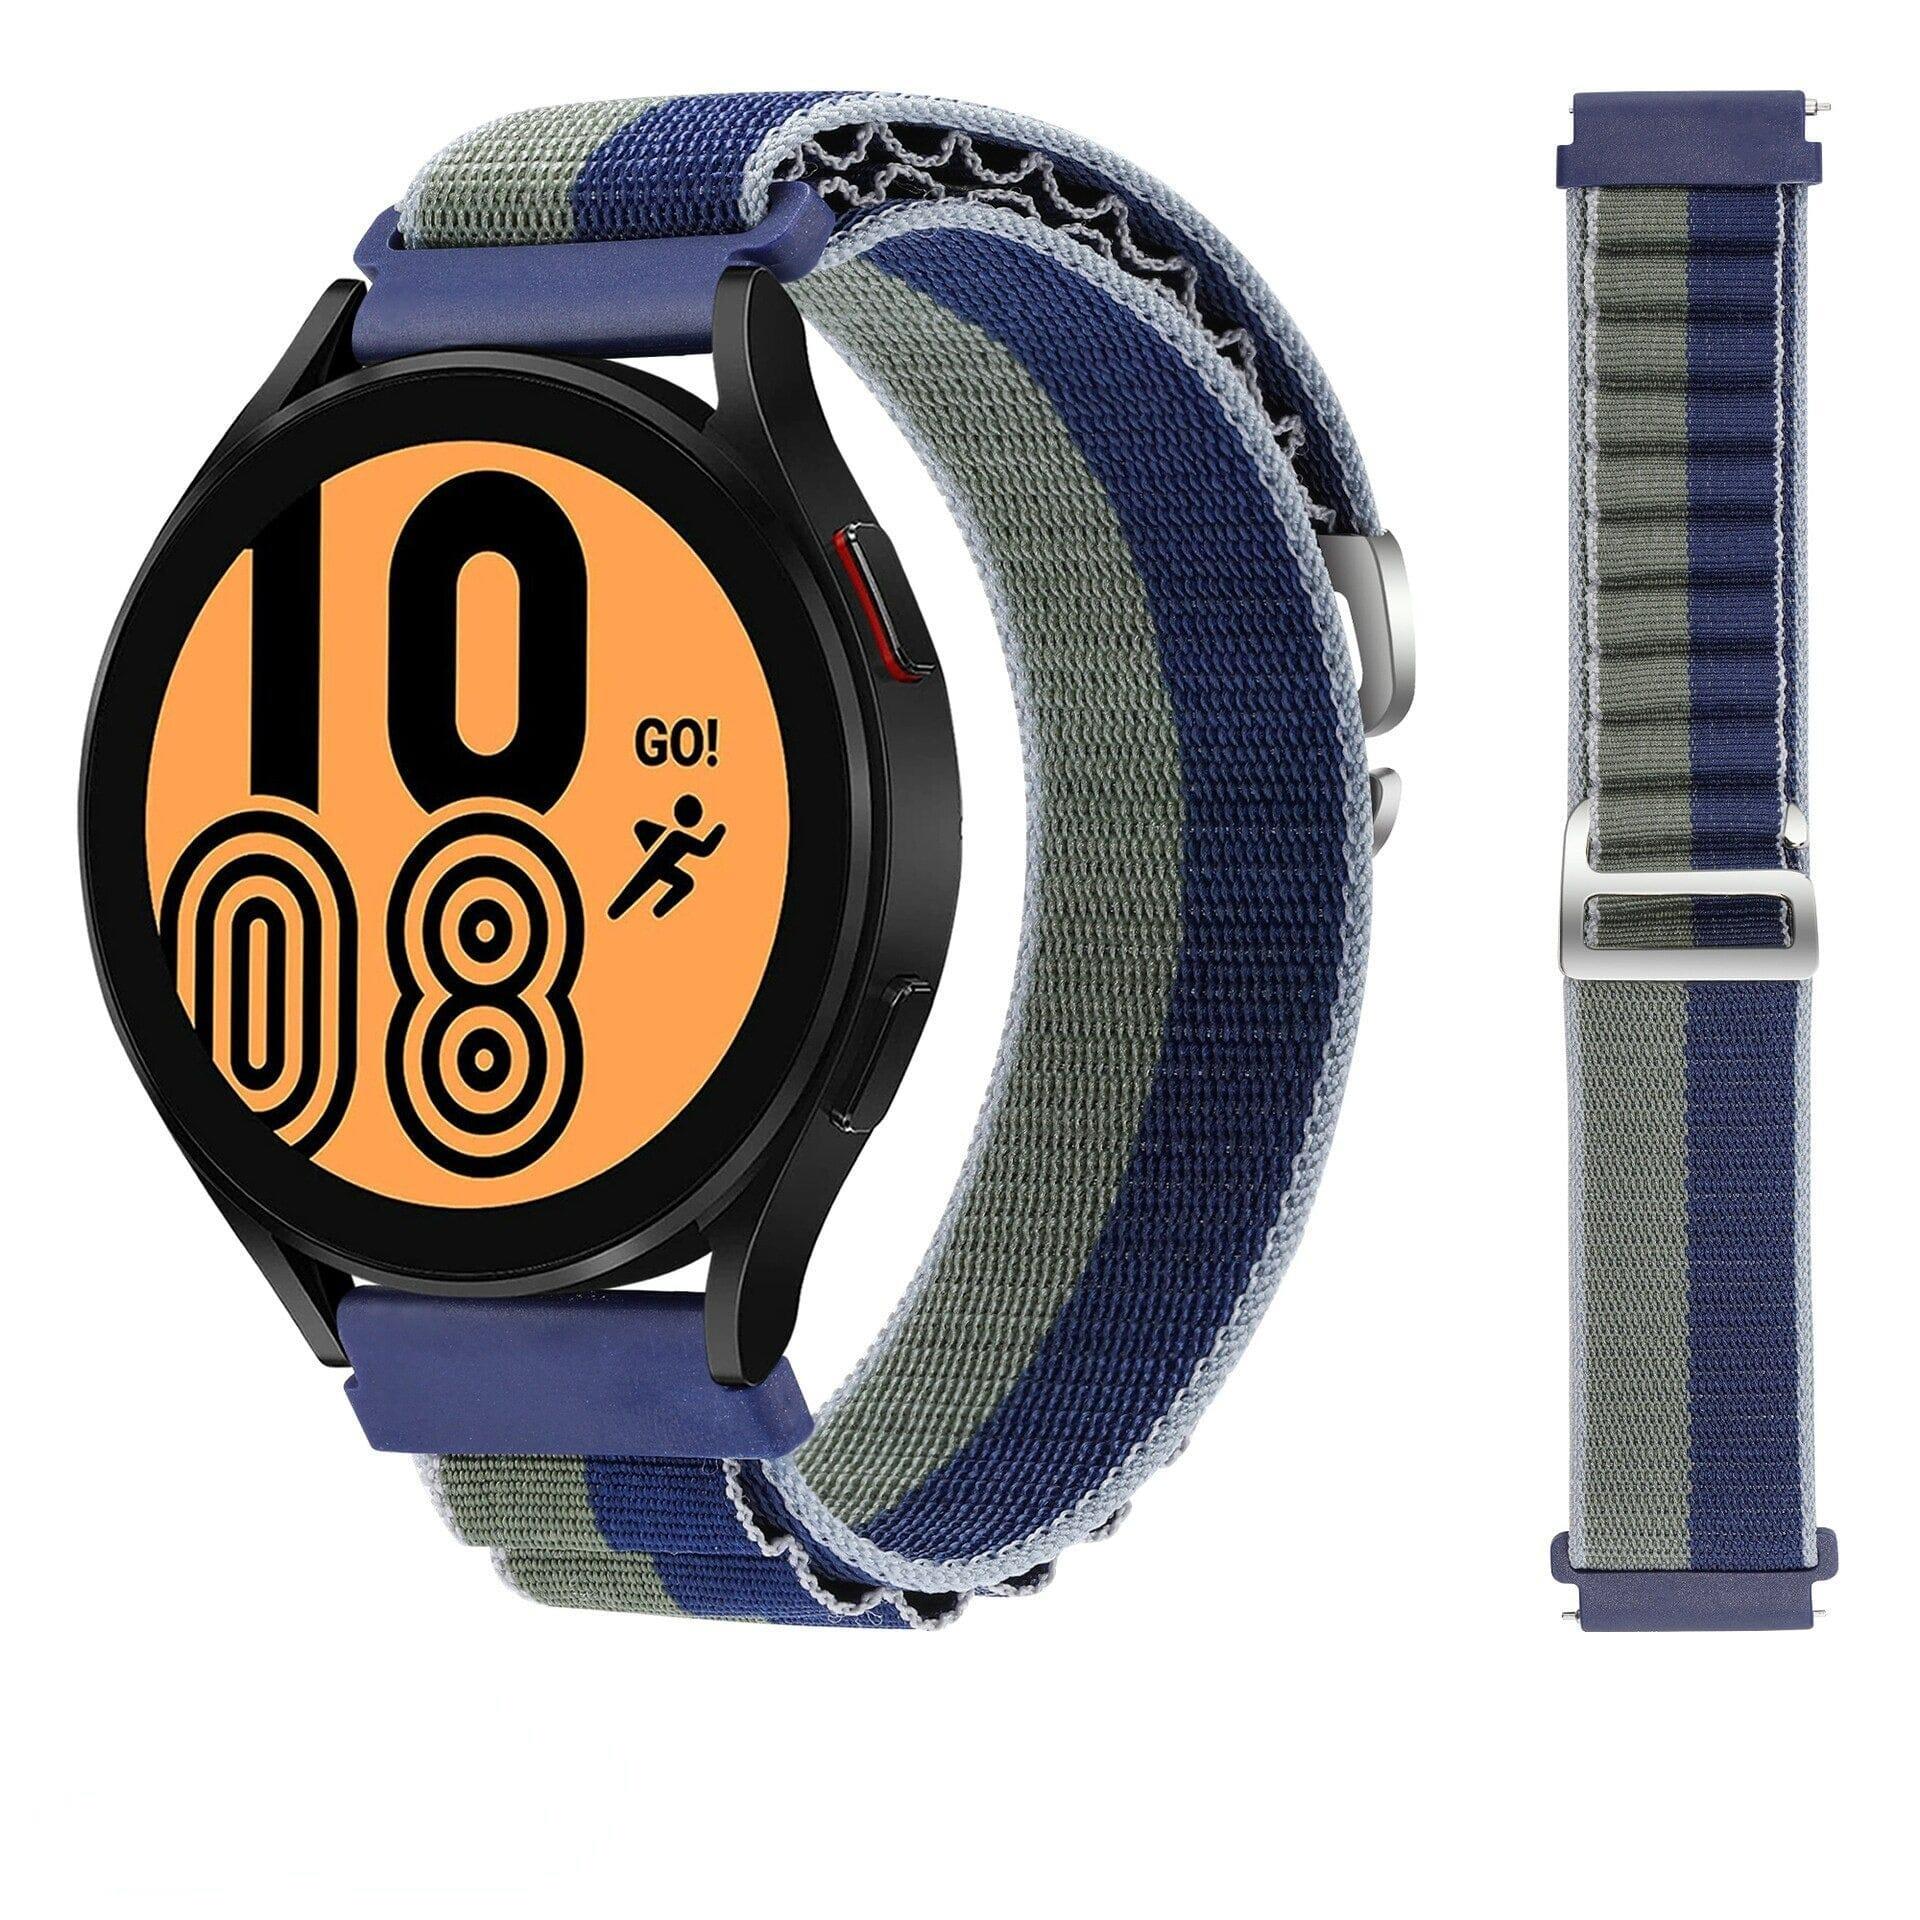 Alpine Loop Watch Straps Compatible with the Suunto 3 & 3 Fitness